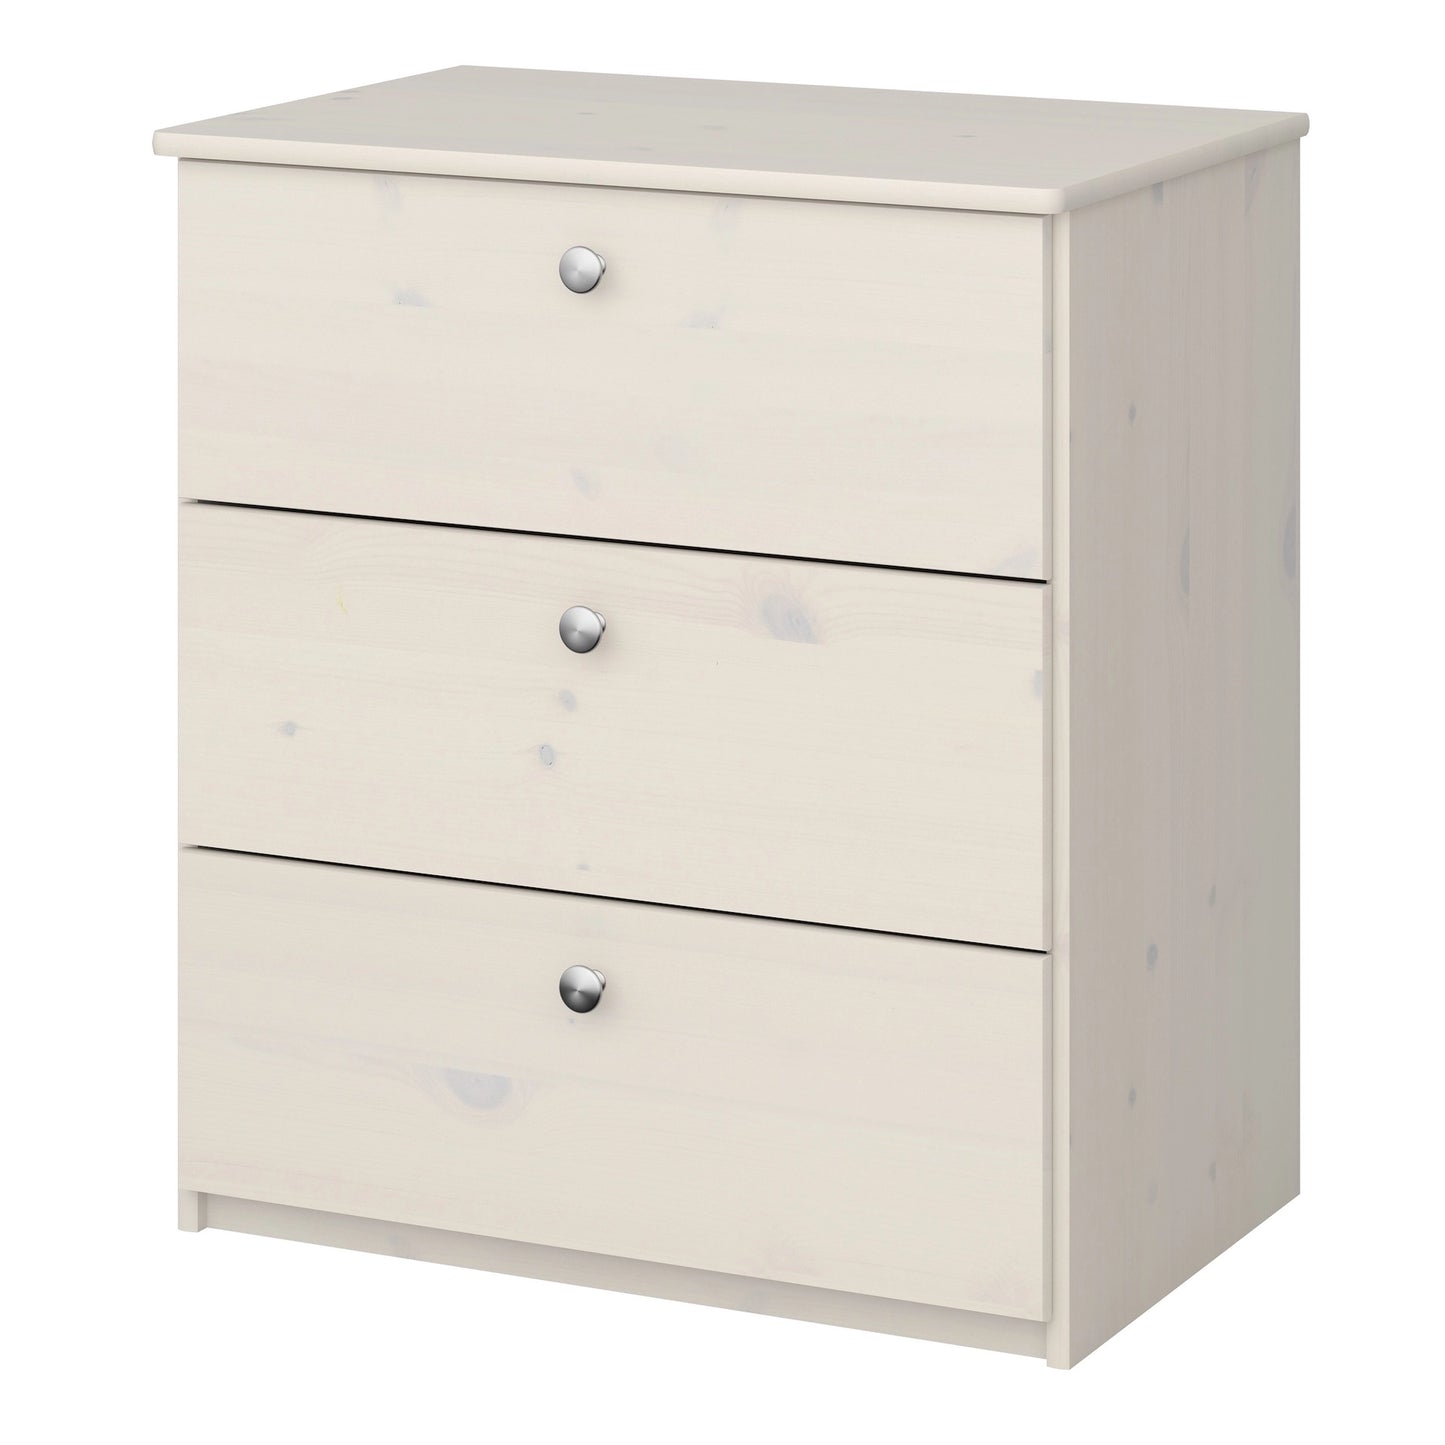 Furniture To Go Memphis Chest of Drawers 3 Drawers in Whitewash